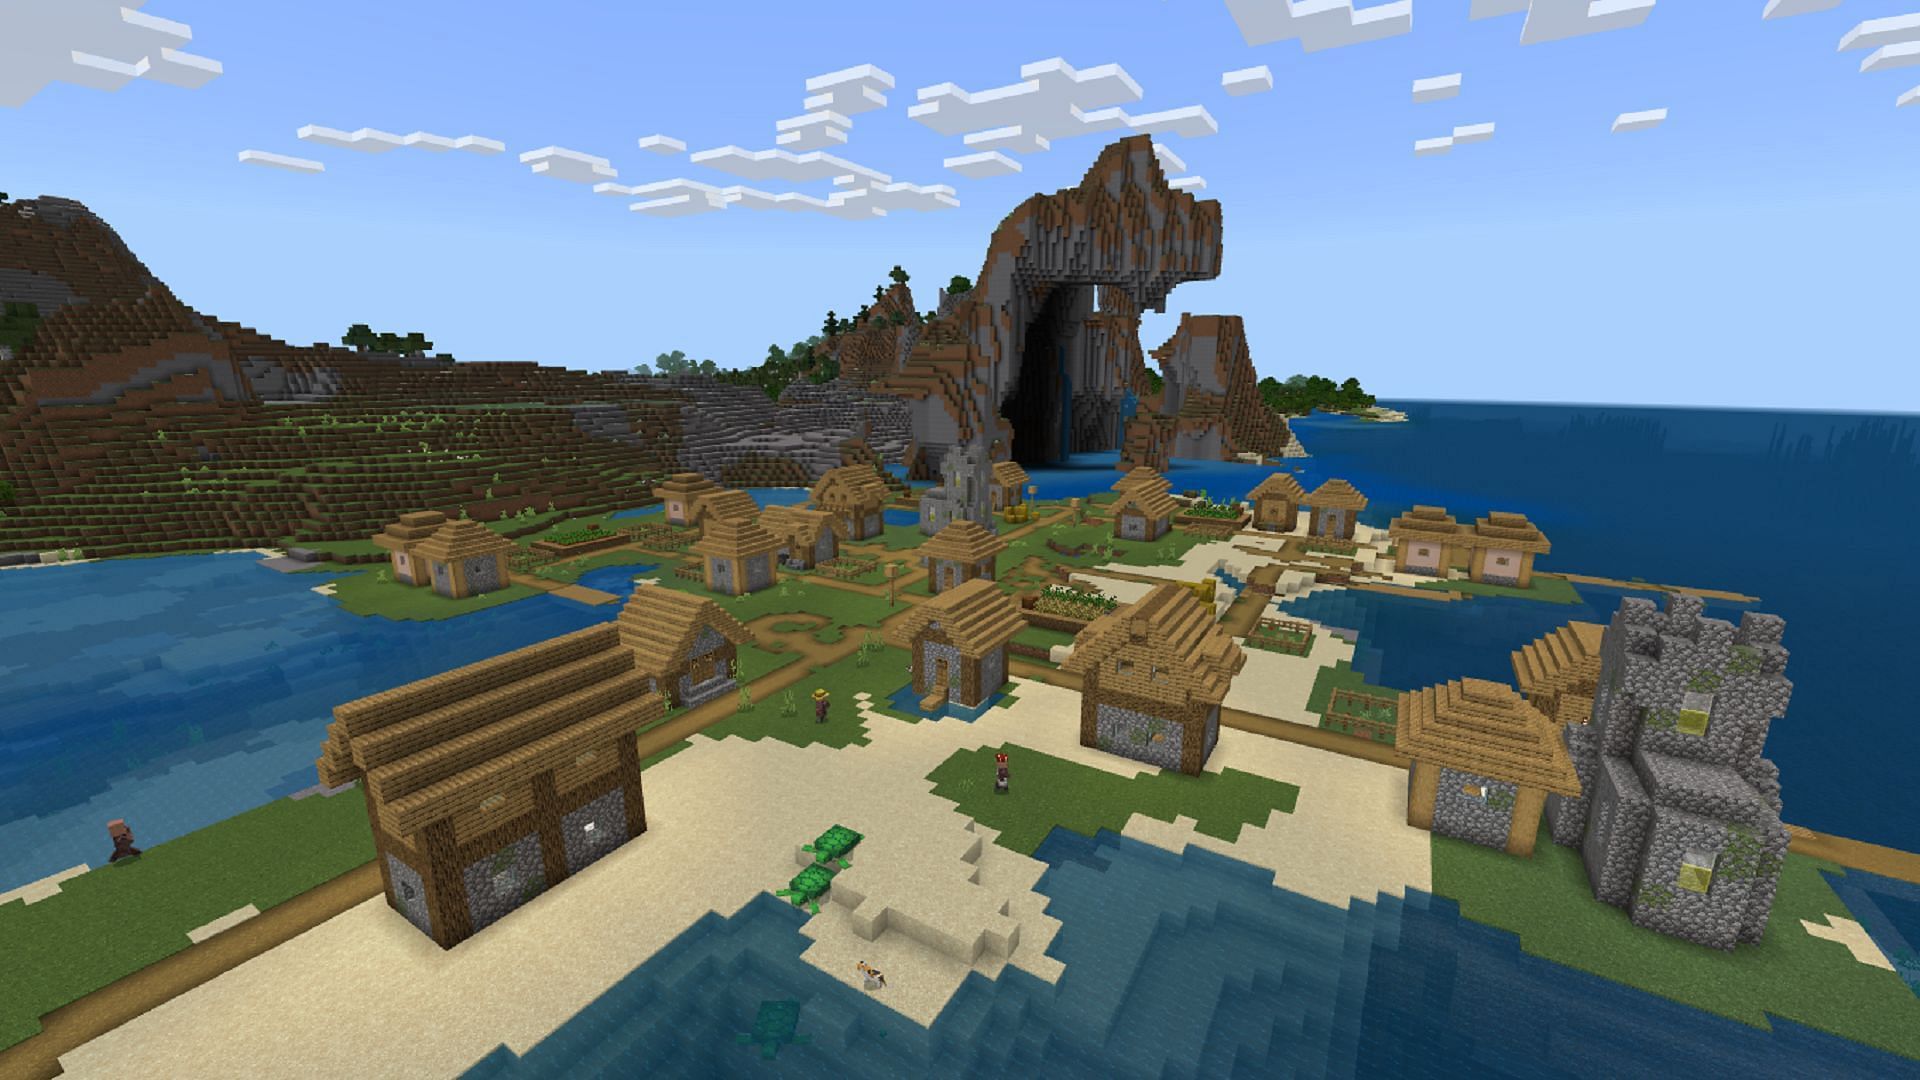 This spawn village has plenty to offer Minecraft players before venturing out into the sea (Image via Mojang)